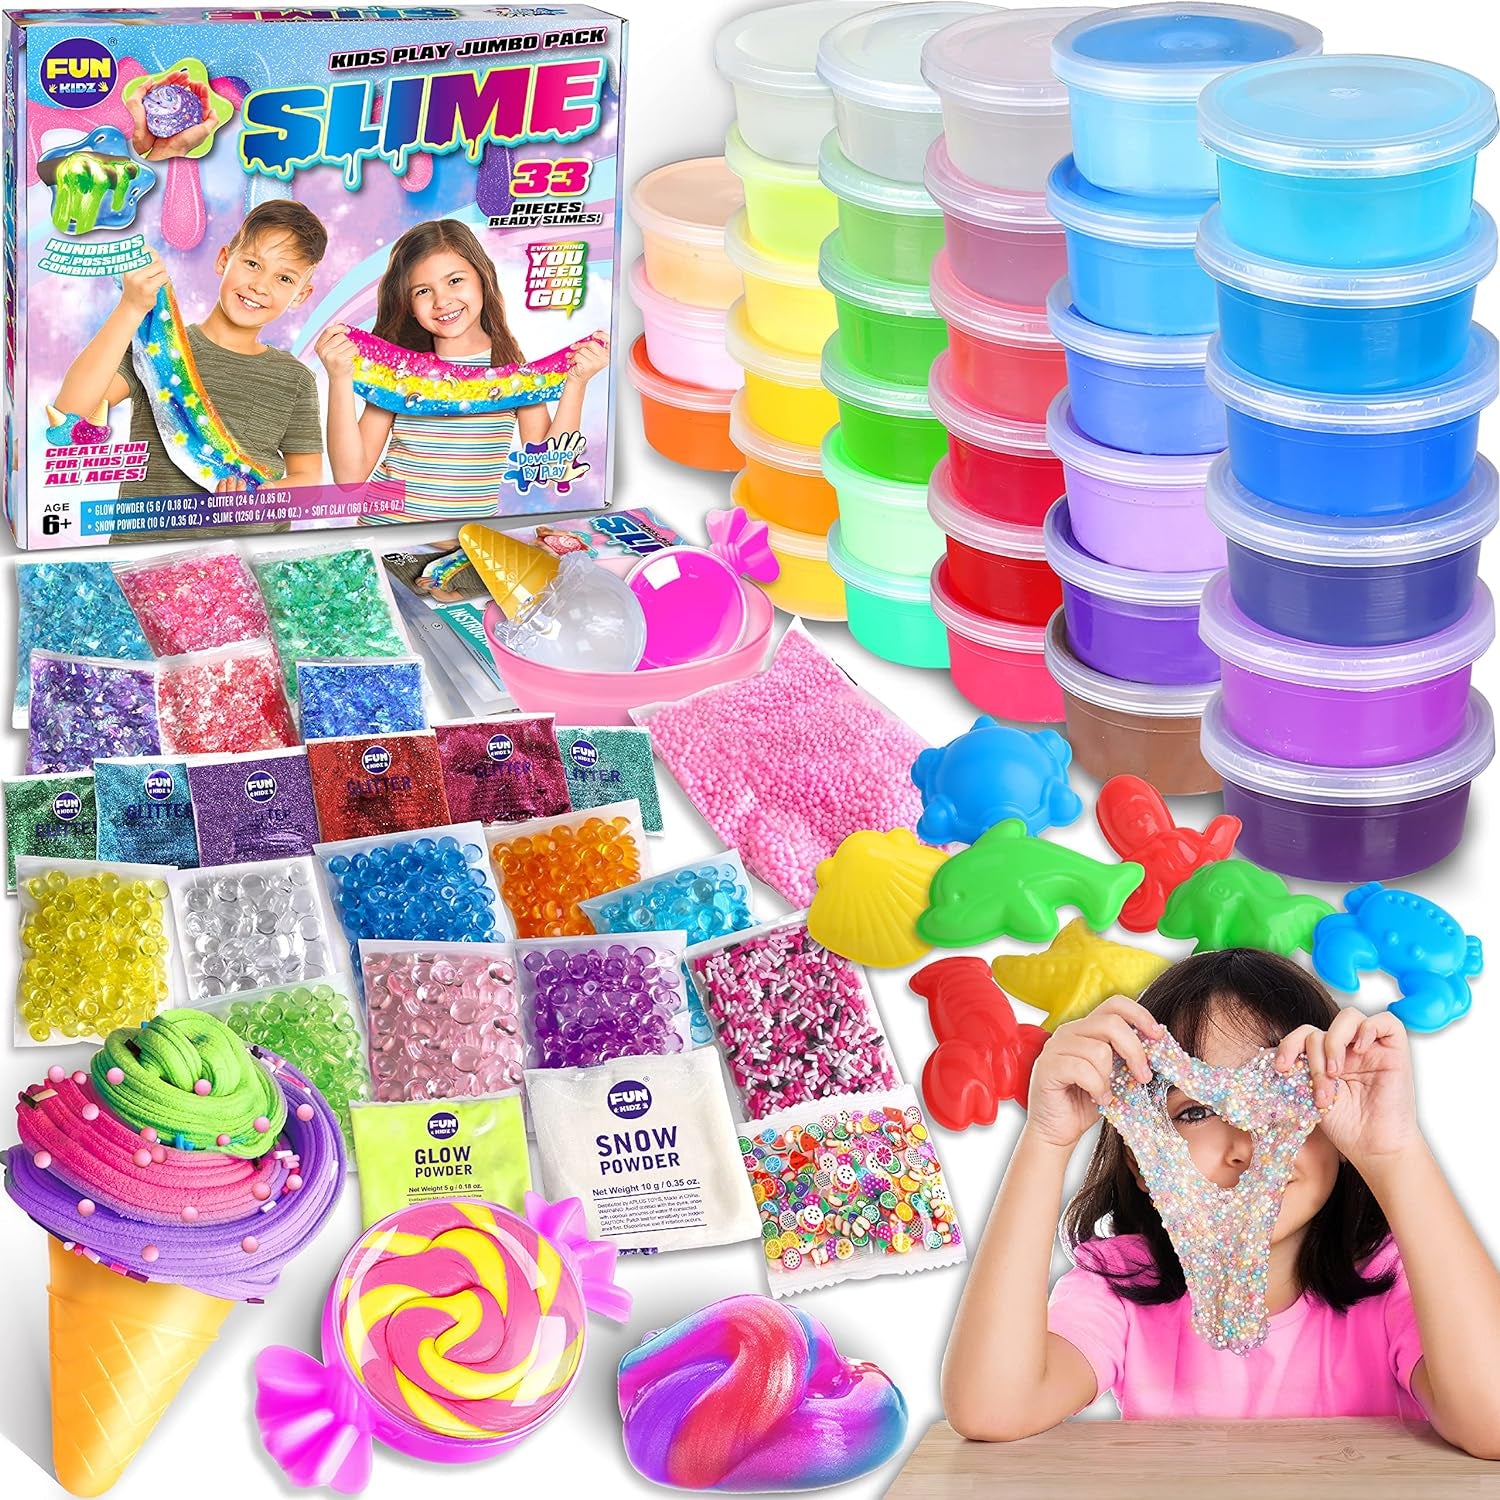 33 Cups Jumbo Slime Kit for Kids, Funkidz Premade Ultimate Slime Pack to DIY Soft, Cloud, Clear, Butter, Glitter, Glow in Dark Slime Making Kits Super Slime Party Favors Gift Toys for Girls and Boys